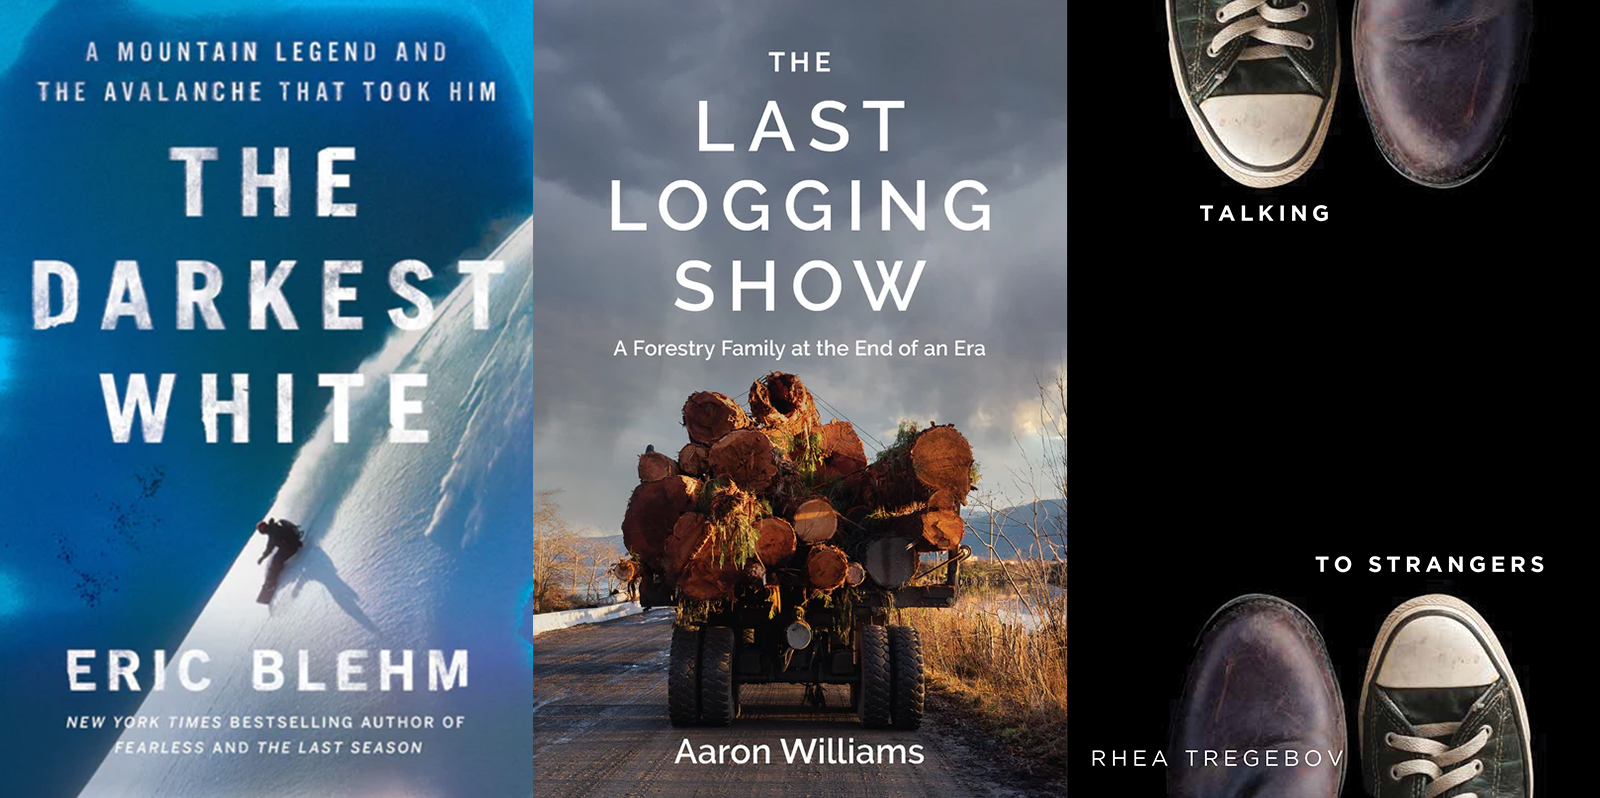 Three book covers, from left: 'The Darkest White' by Eric Blehm; 'The Last Logging Show' by Aaron Williams; 'Talking to Strangers' by Rhea Tregebov.